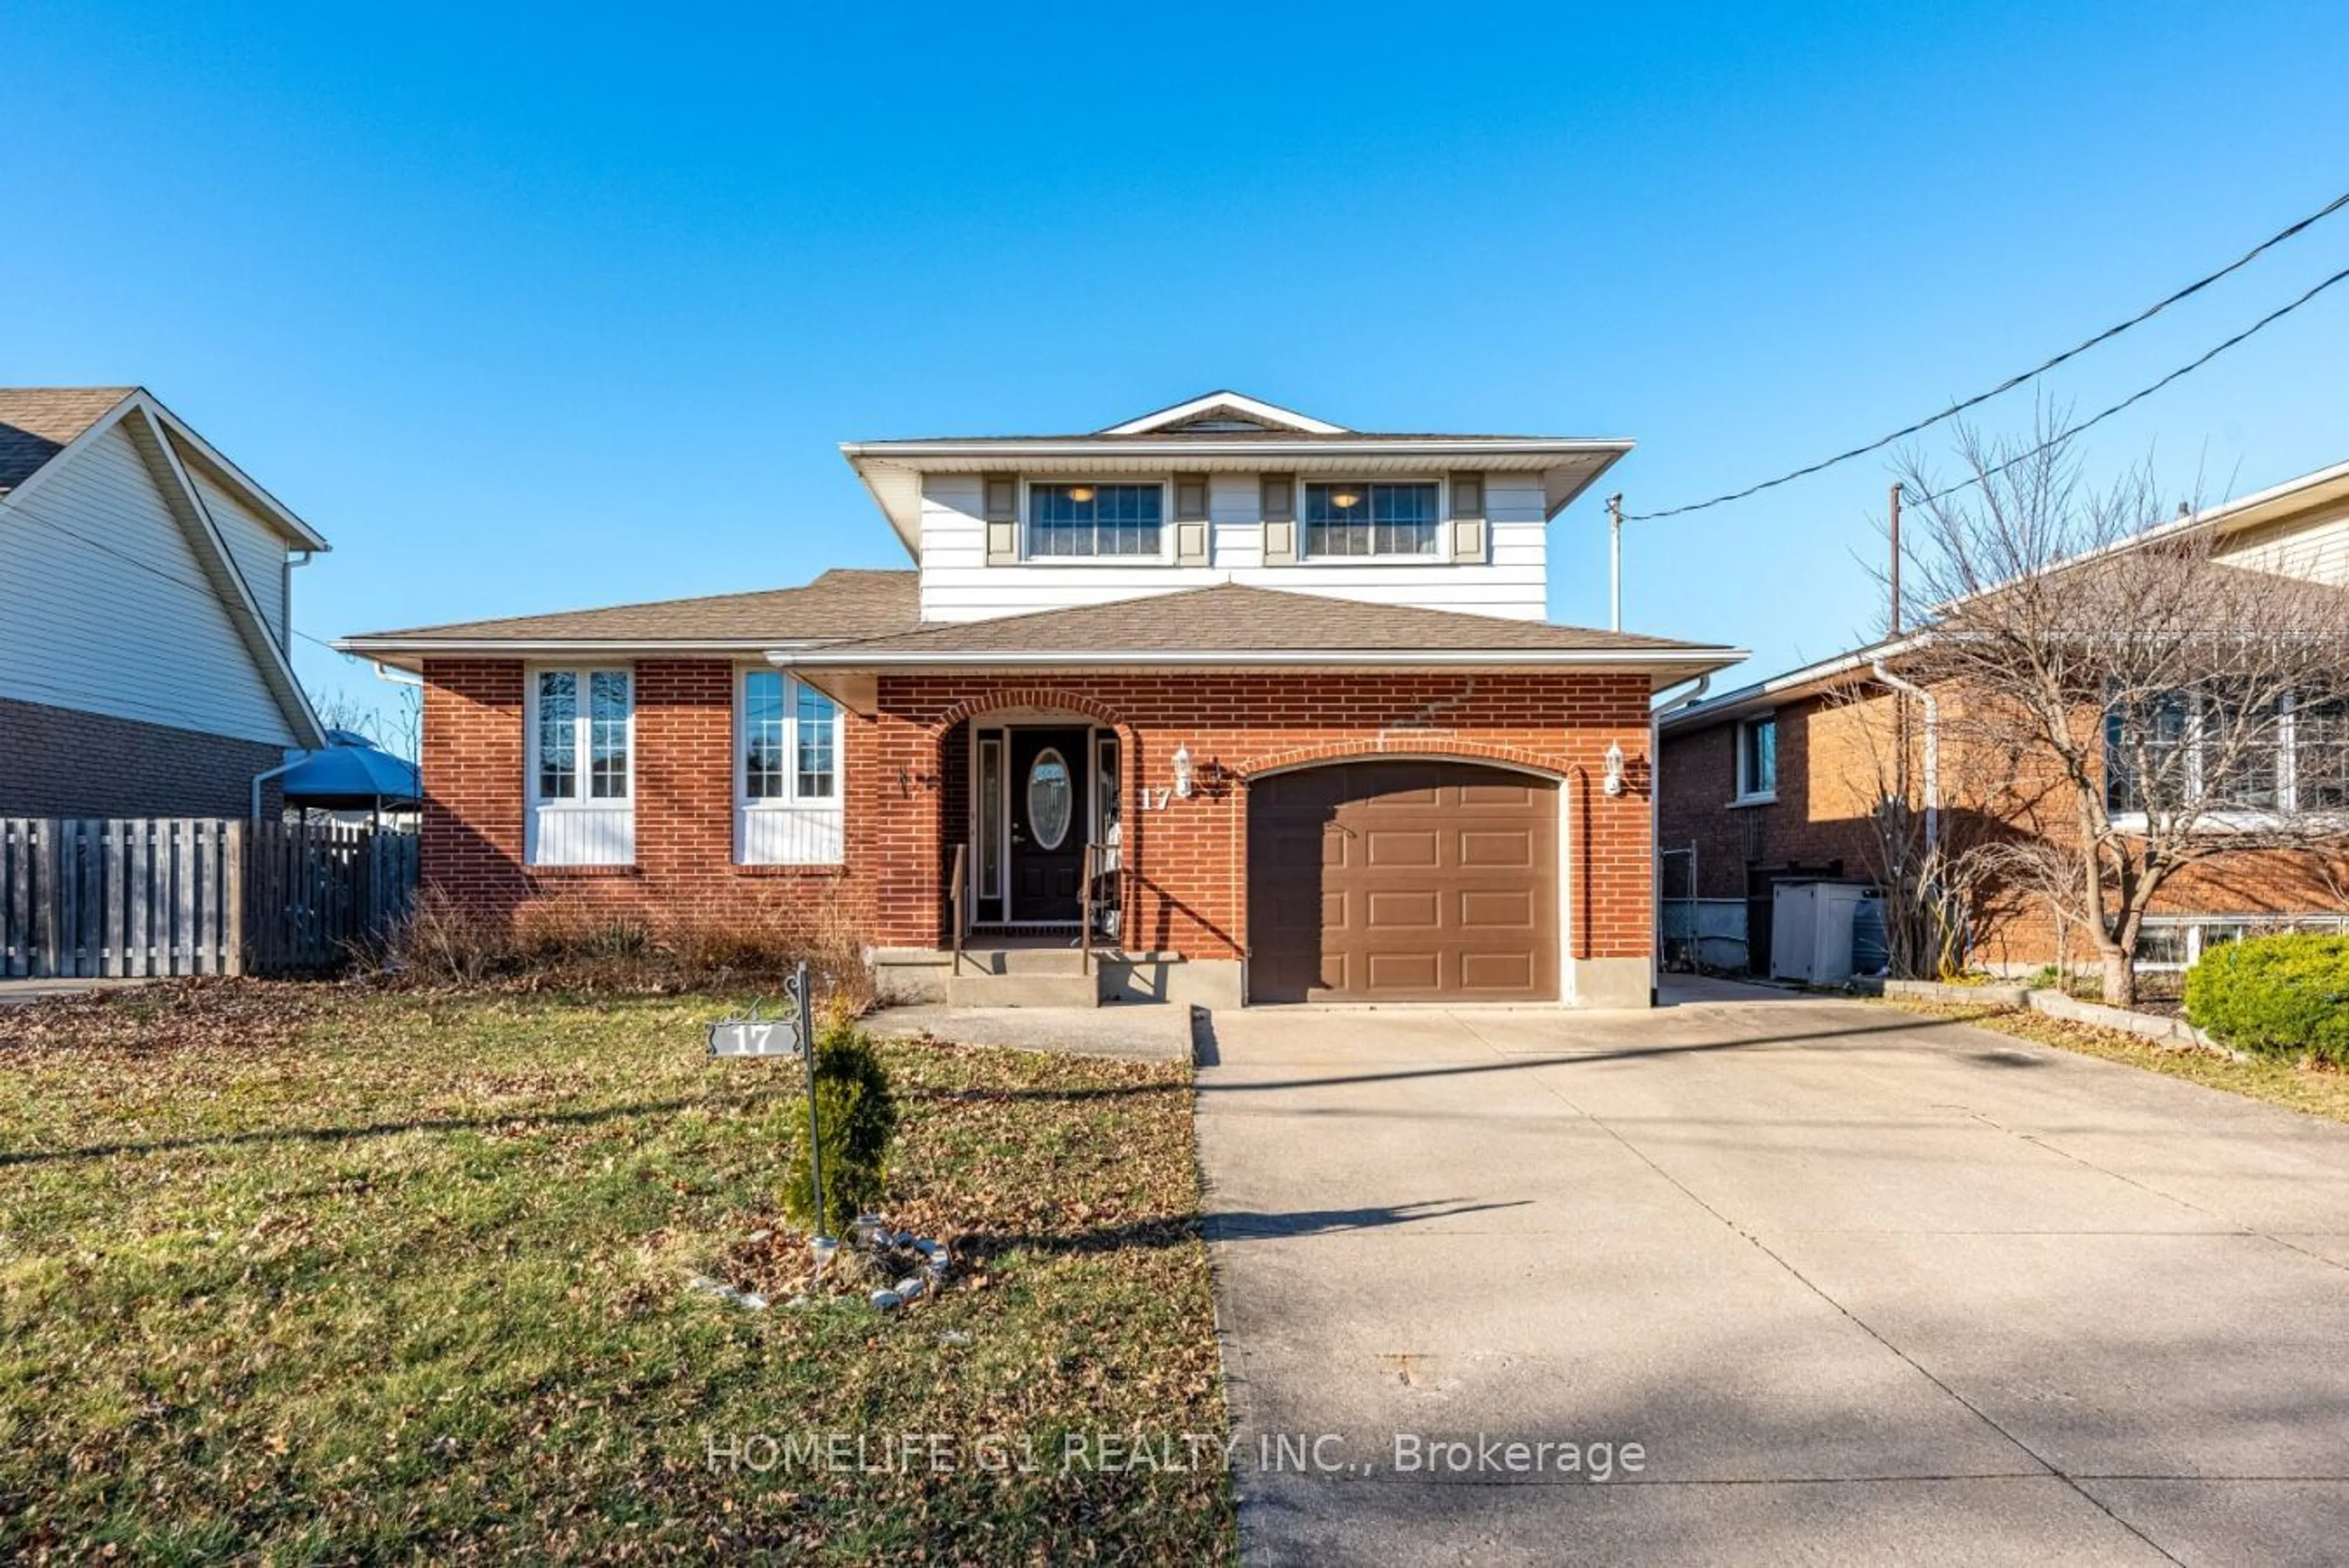 Frontside or backside of a home for 17 Stonegate Dr, St. Catharines Ontario L2P 3K9